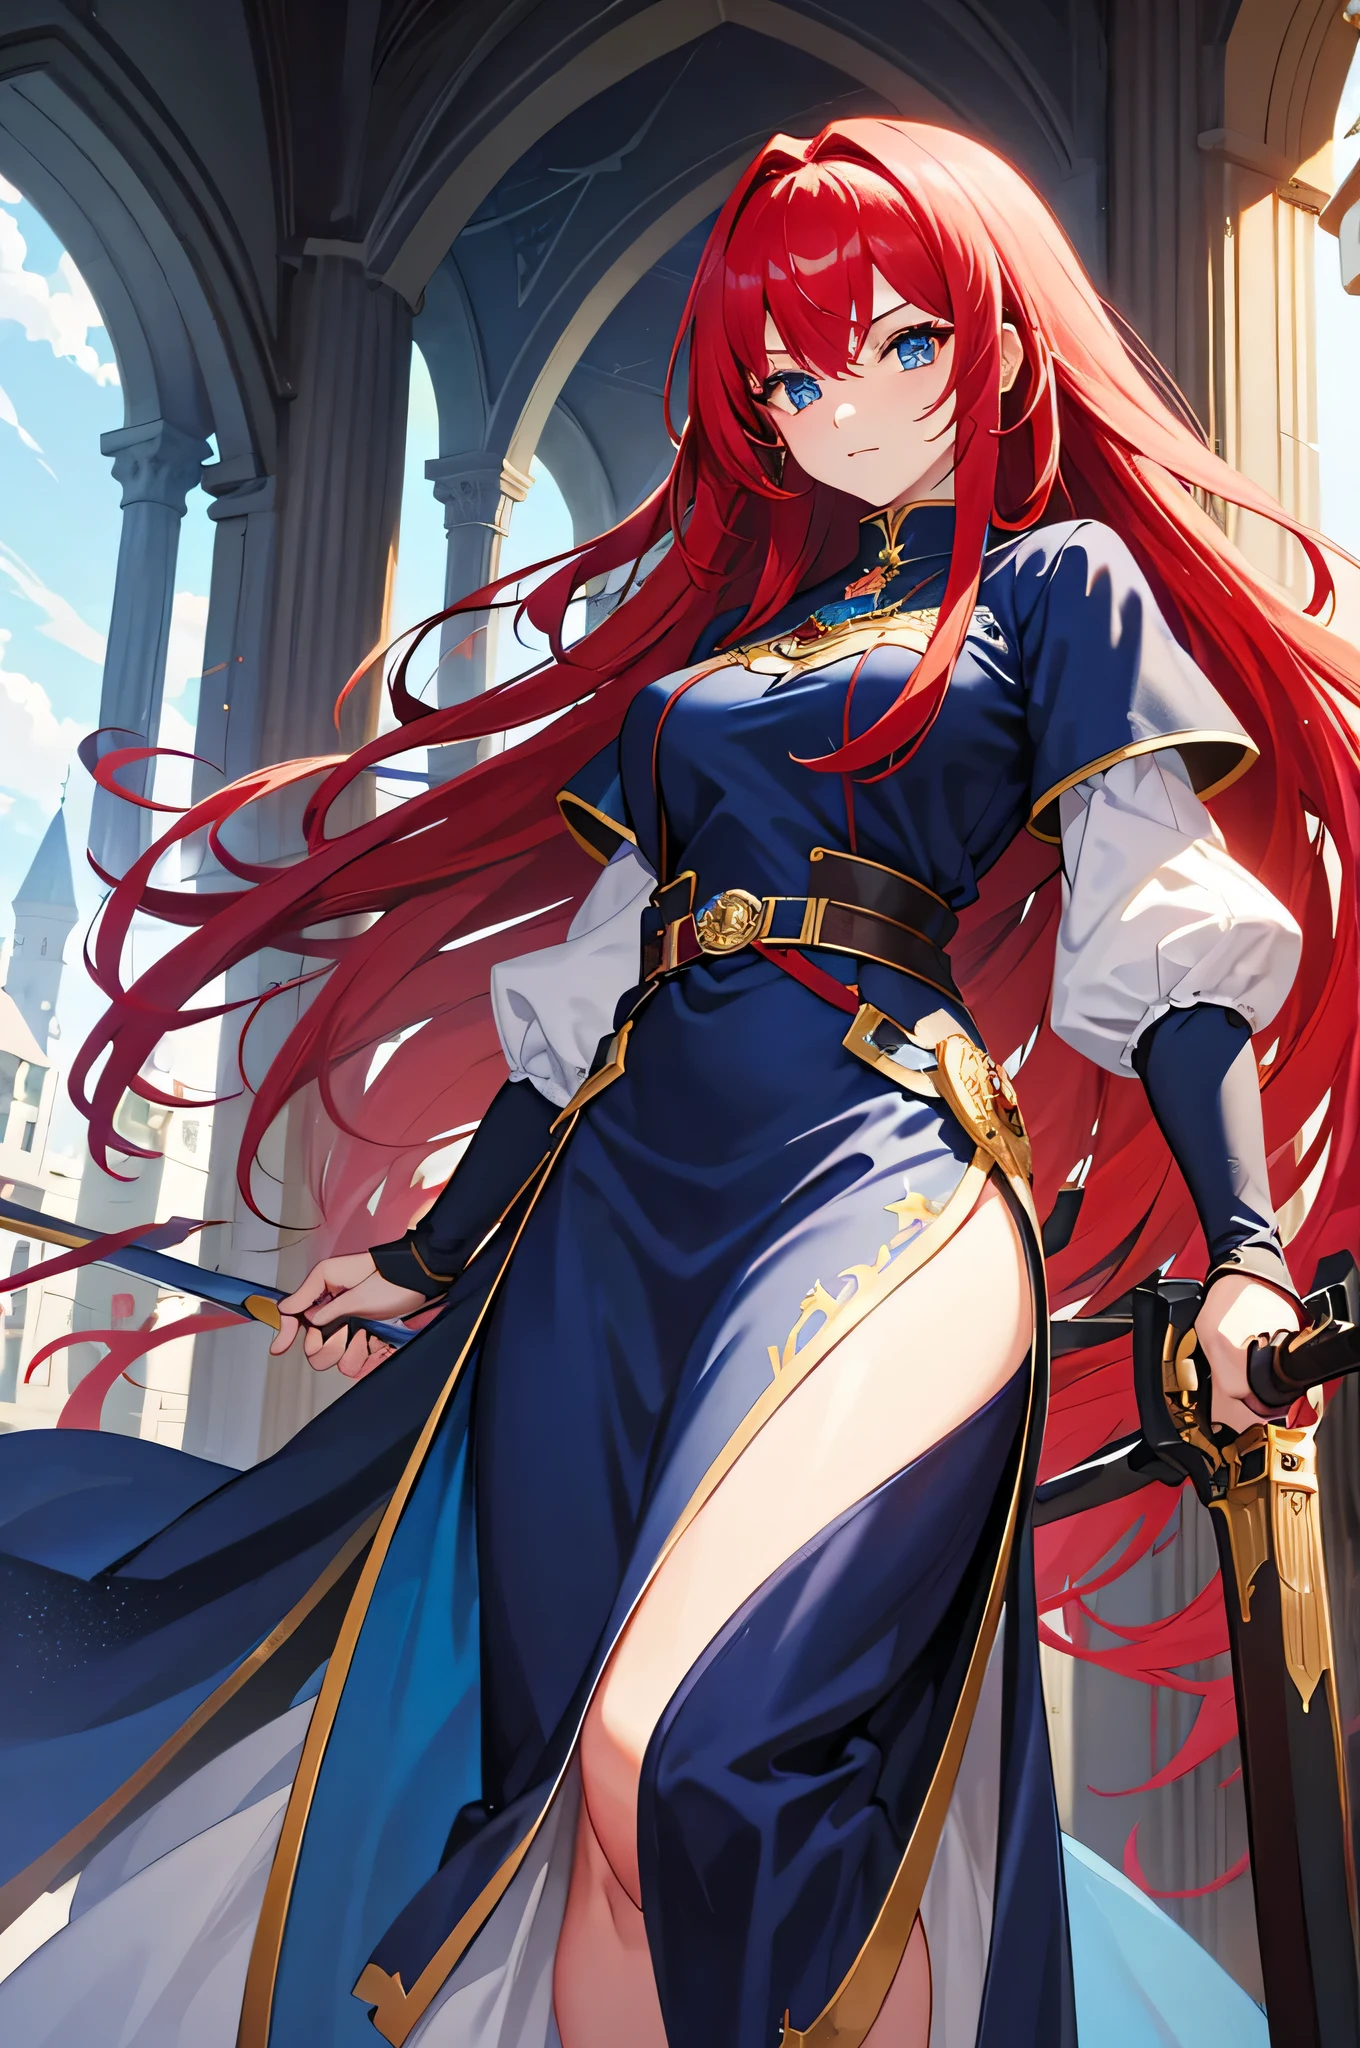 4K,hight resolution,One Woman,Bright red hair,Longhaire,Blue eyes,Knights,white holy armor,jewel decorations,Big sword,medieval town